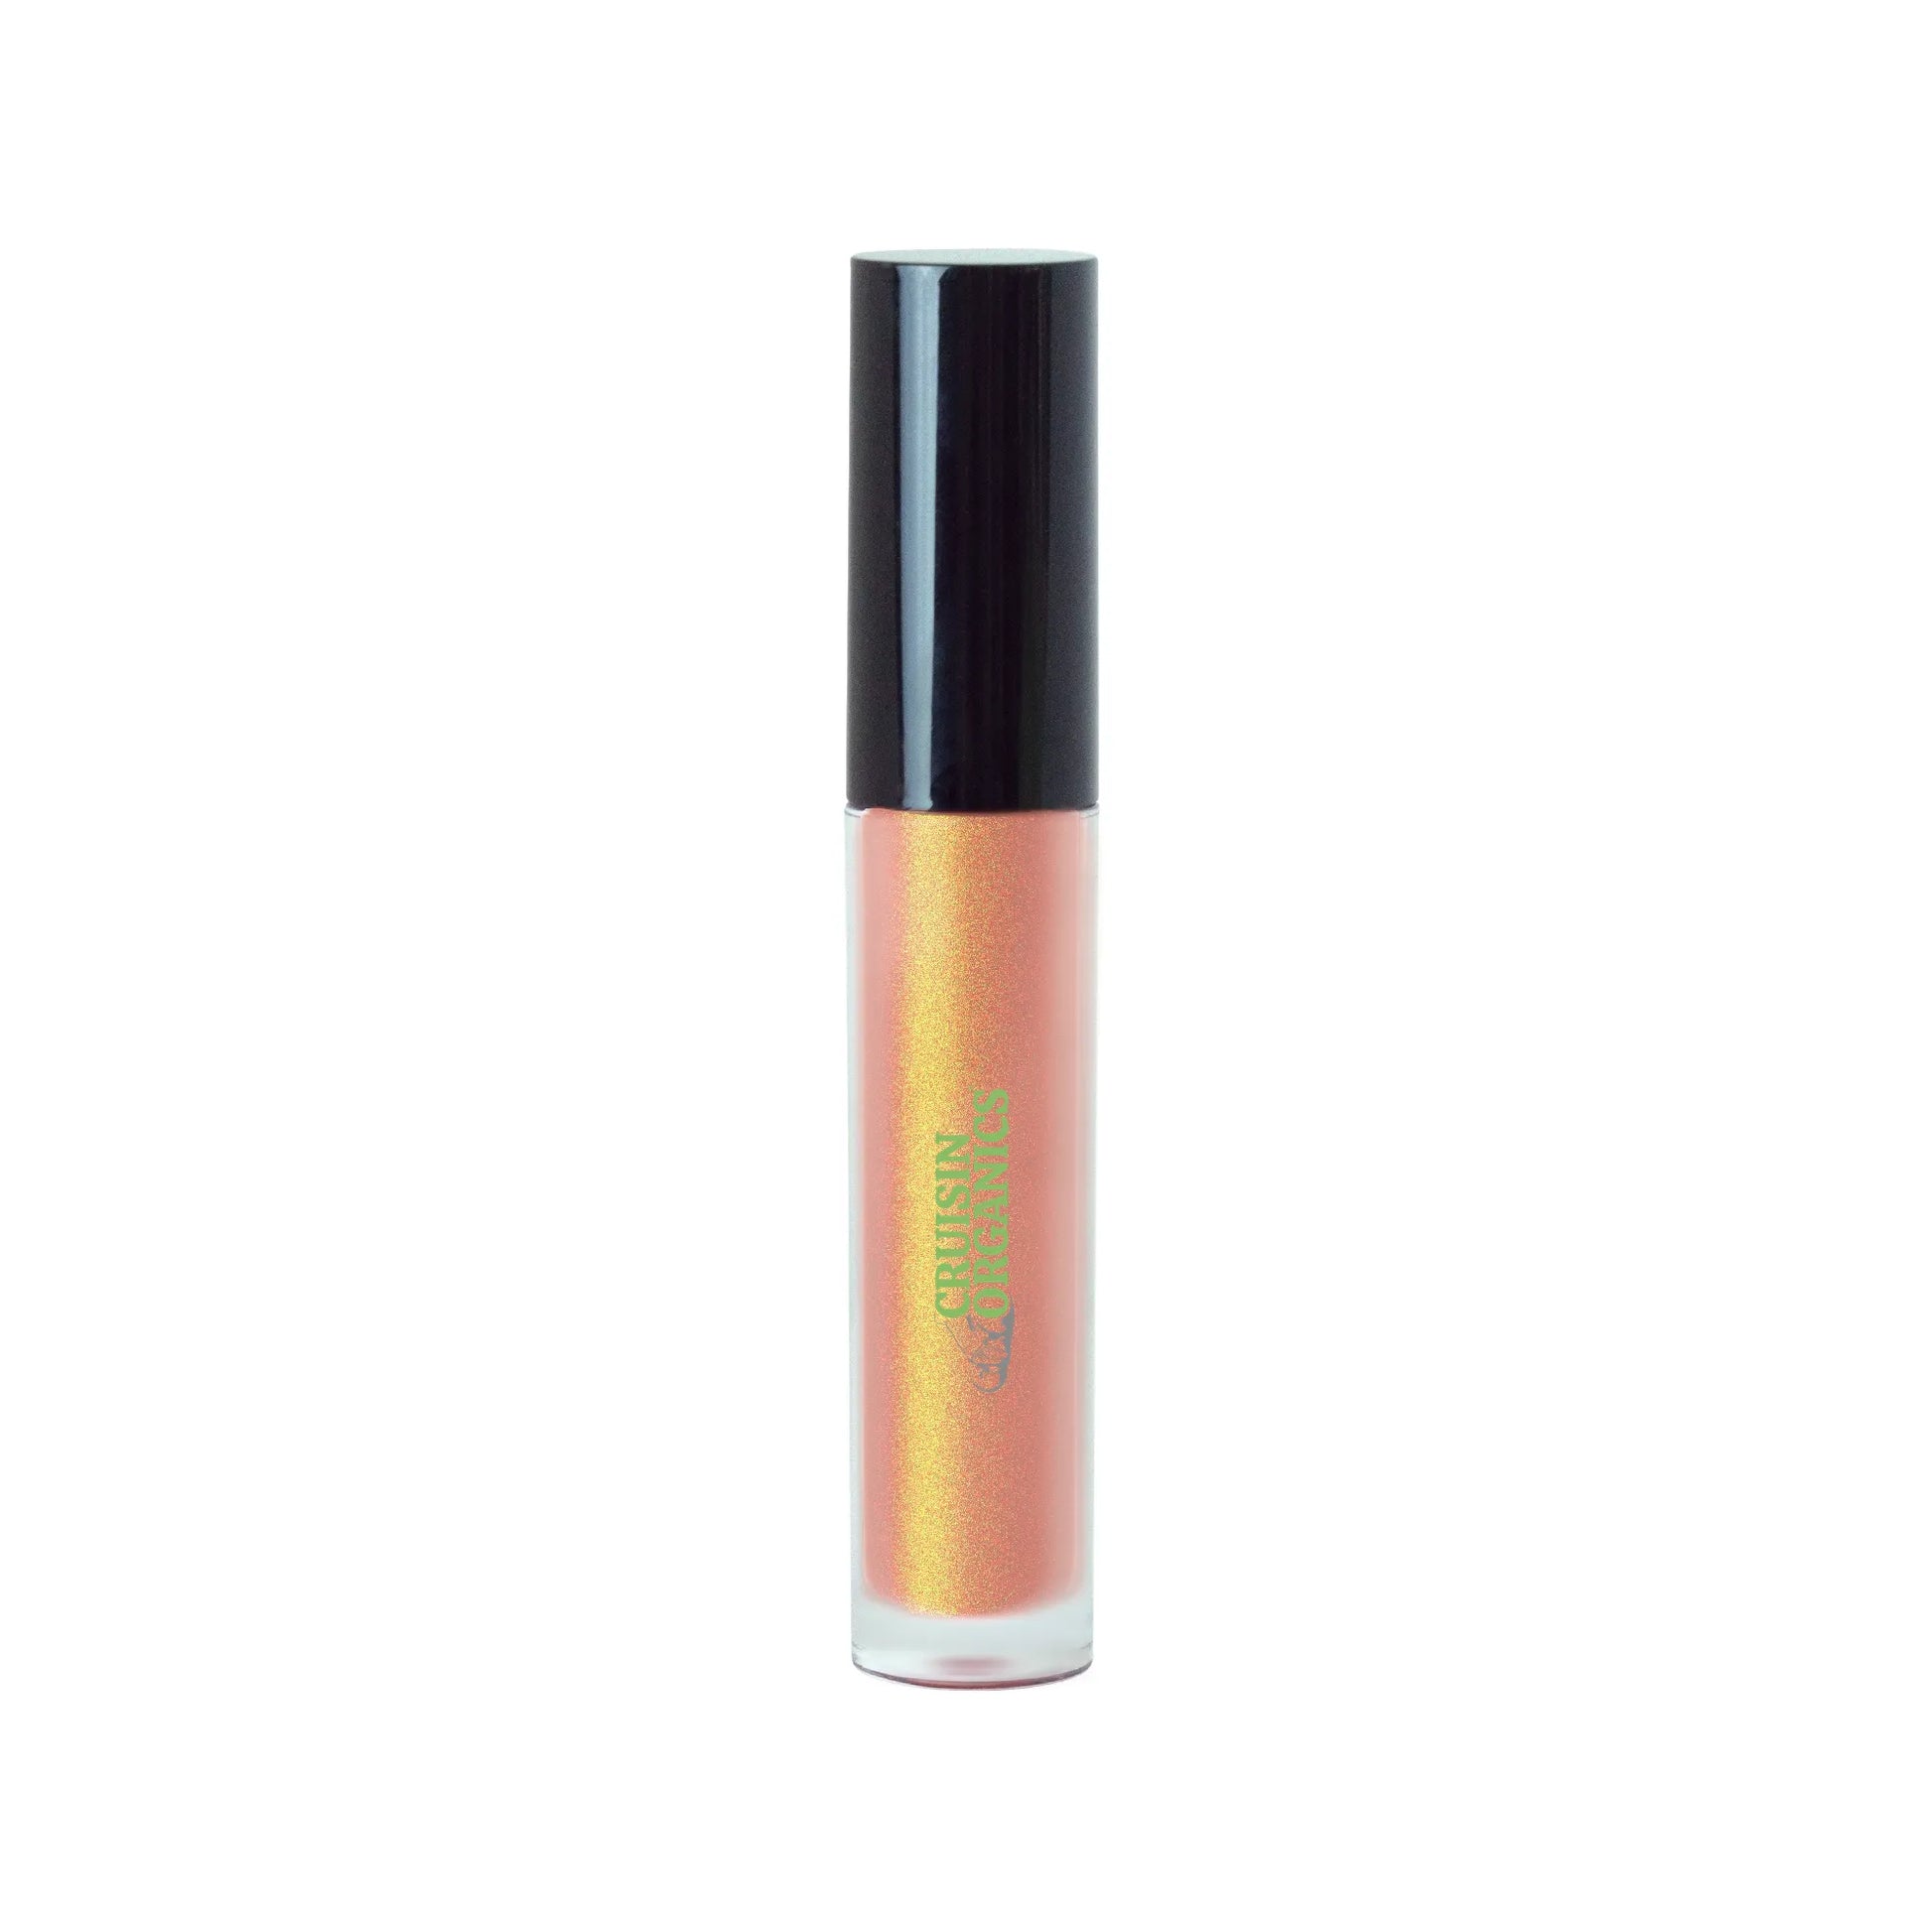 SPF-protected liquid lip gloss by Cruisin Organics Seduction. Women adore the sensation of being seduced momentarily. Cruisin Organics' Seduction lip gloss is here just in time for Valentine's Day! Shop now, ladies, at our online store.